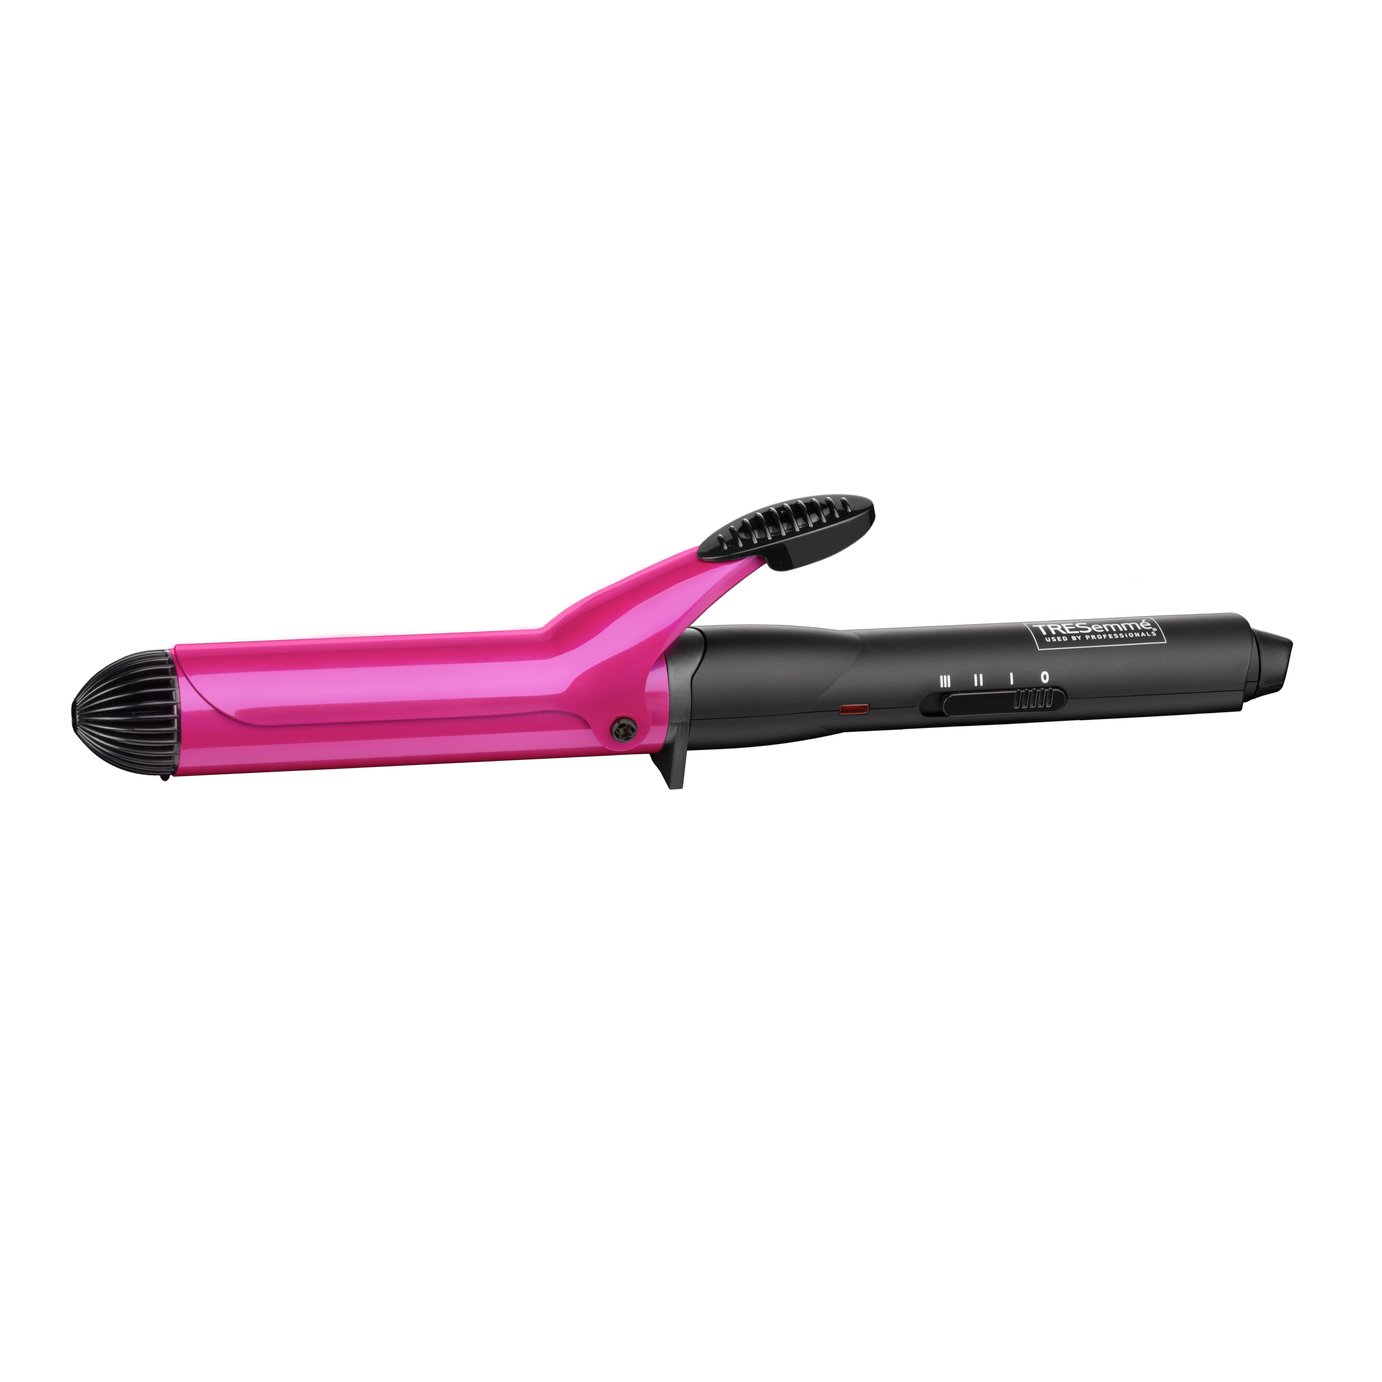 TRESemme Perfectly (Un)Done Curling Tong